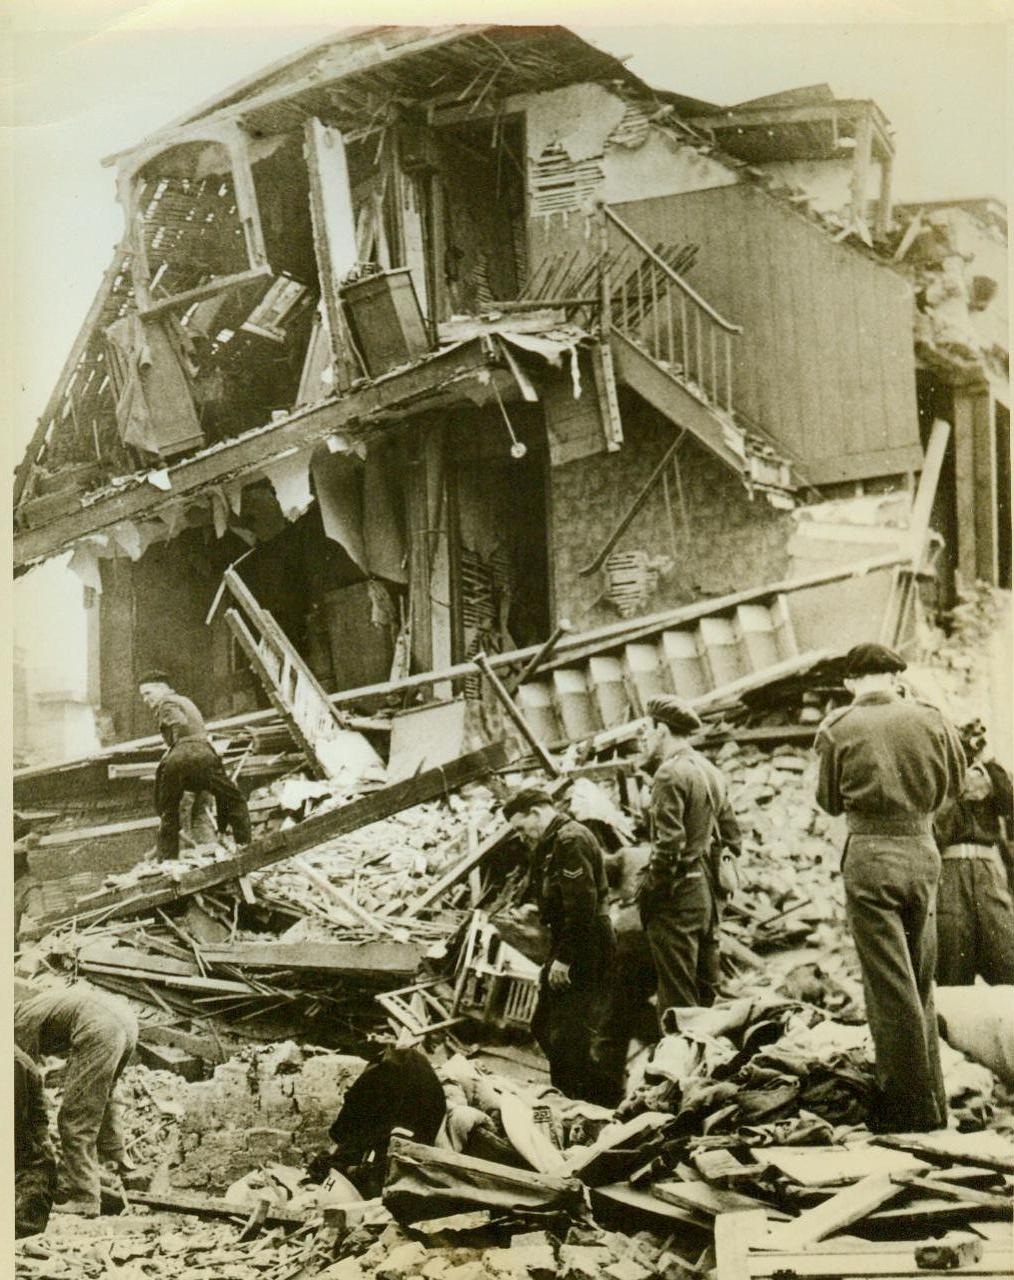 Hunt for victims of robot planes, 6/19/1944. SOUTHERN ENGLAND – Combing the ruins of a home in southern England, rescue workers hunt for possible victims of a raid by the Nazi pilotless plane. The demon ship, sent across the Channel from one of the few robot launching platforms still left after Allied bombings, left this scene of destruction in its wake. CREDIT LINE (ACME) 6/19/44;